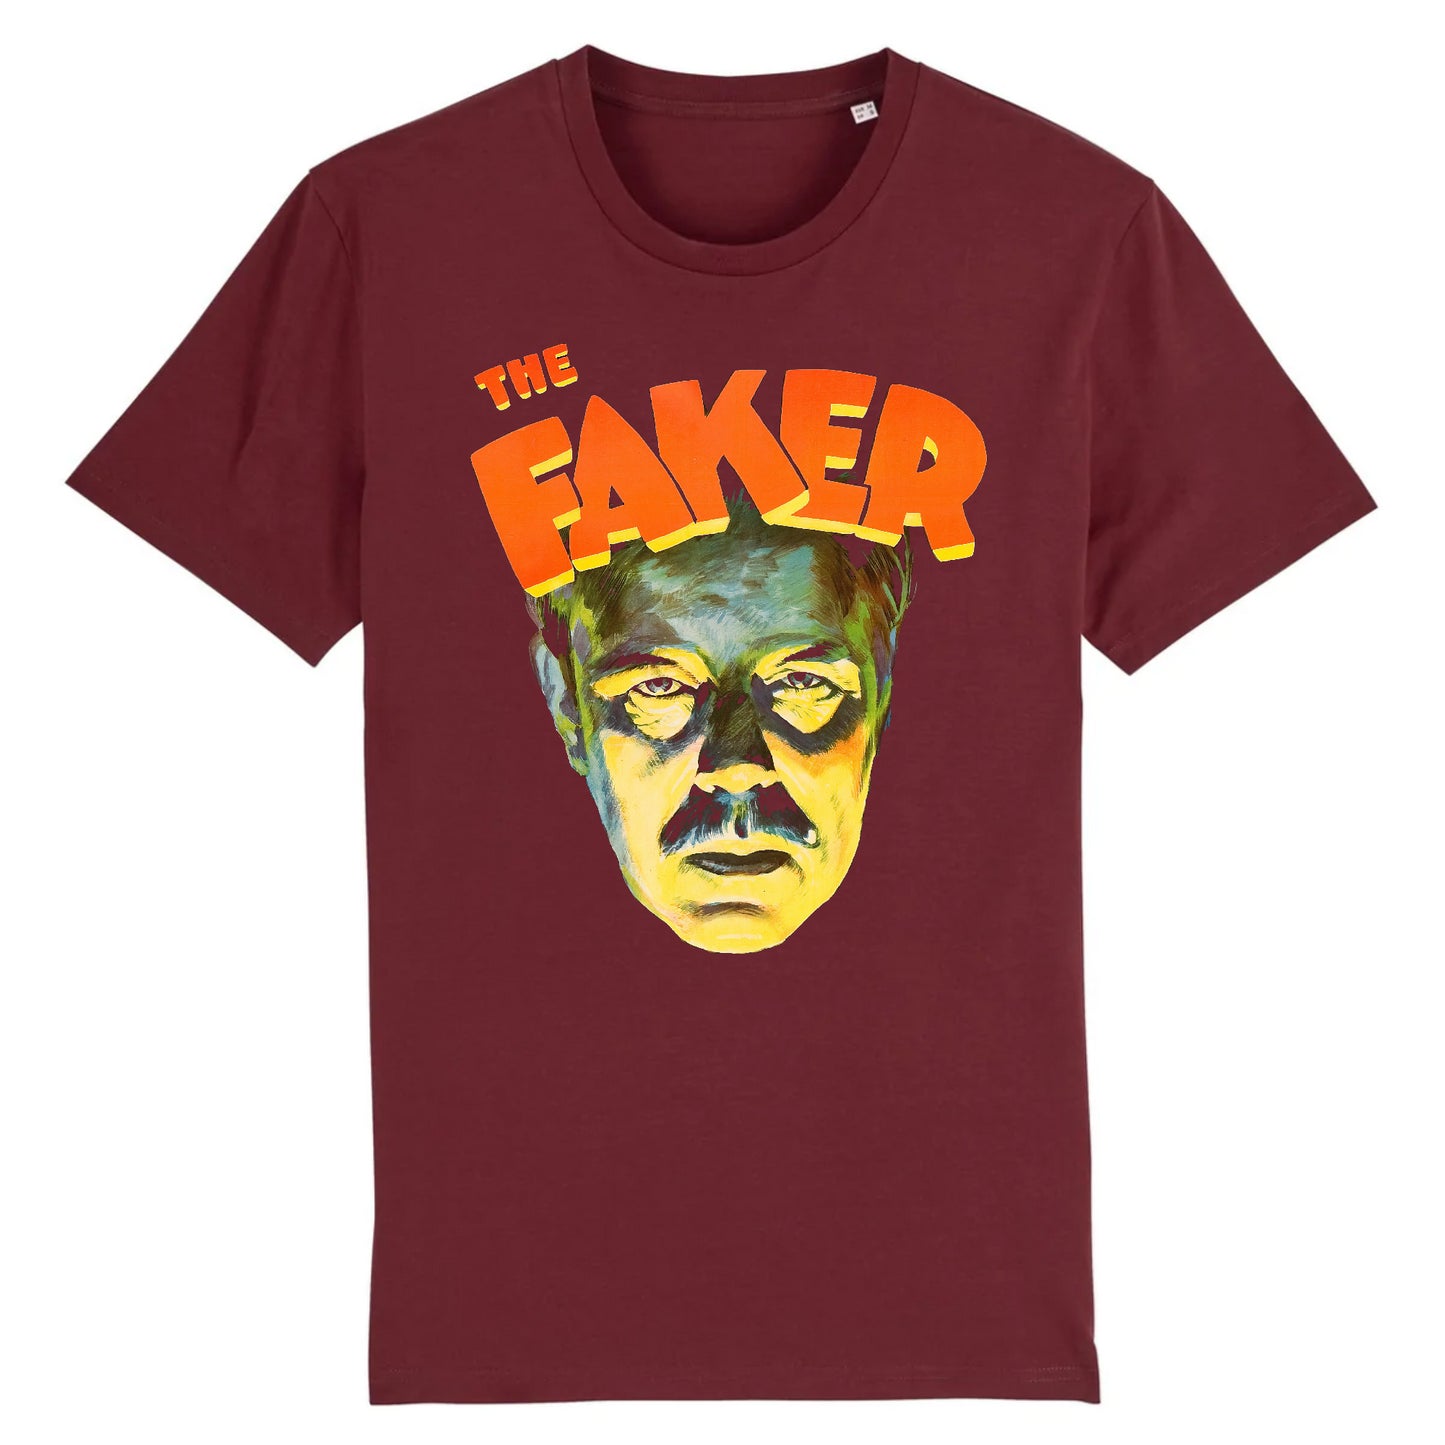 Based on the poster for THE FAKER, 1929 - Organic Cotton T-Shirts